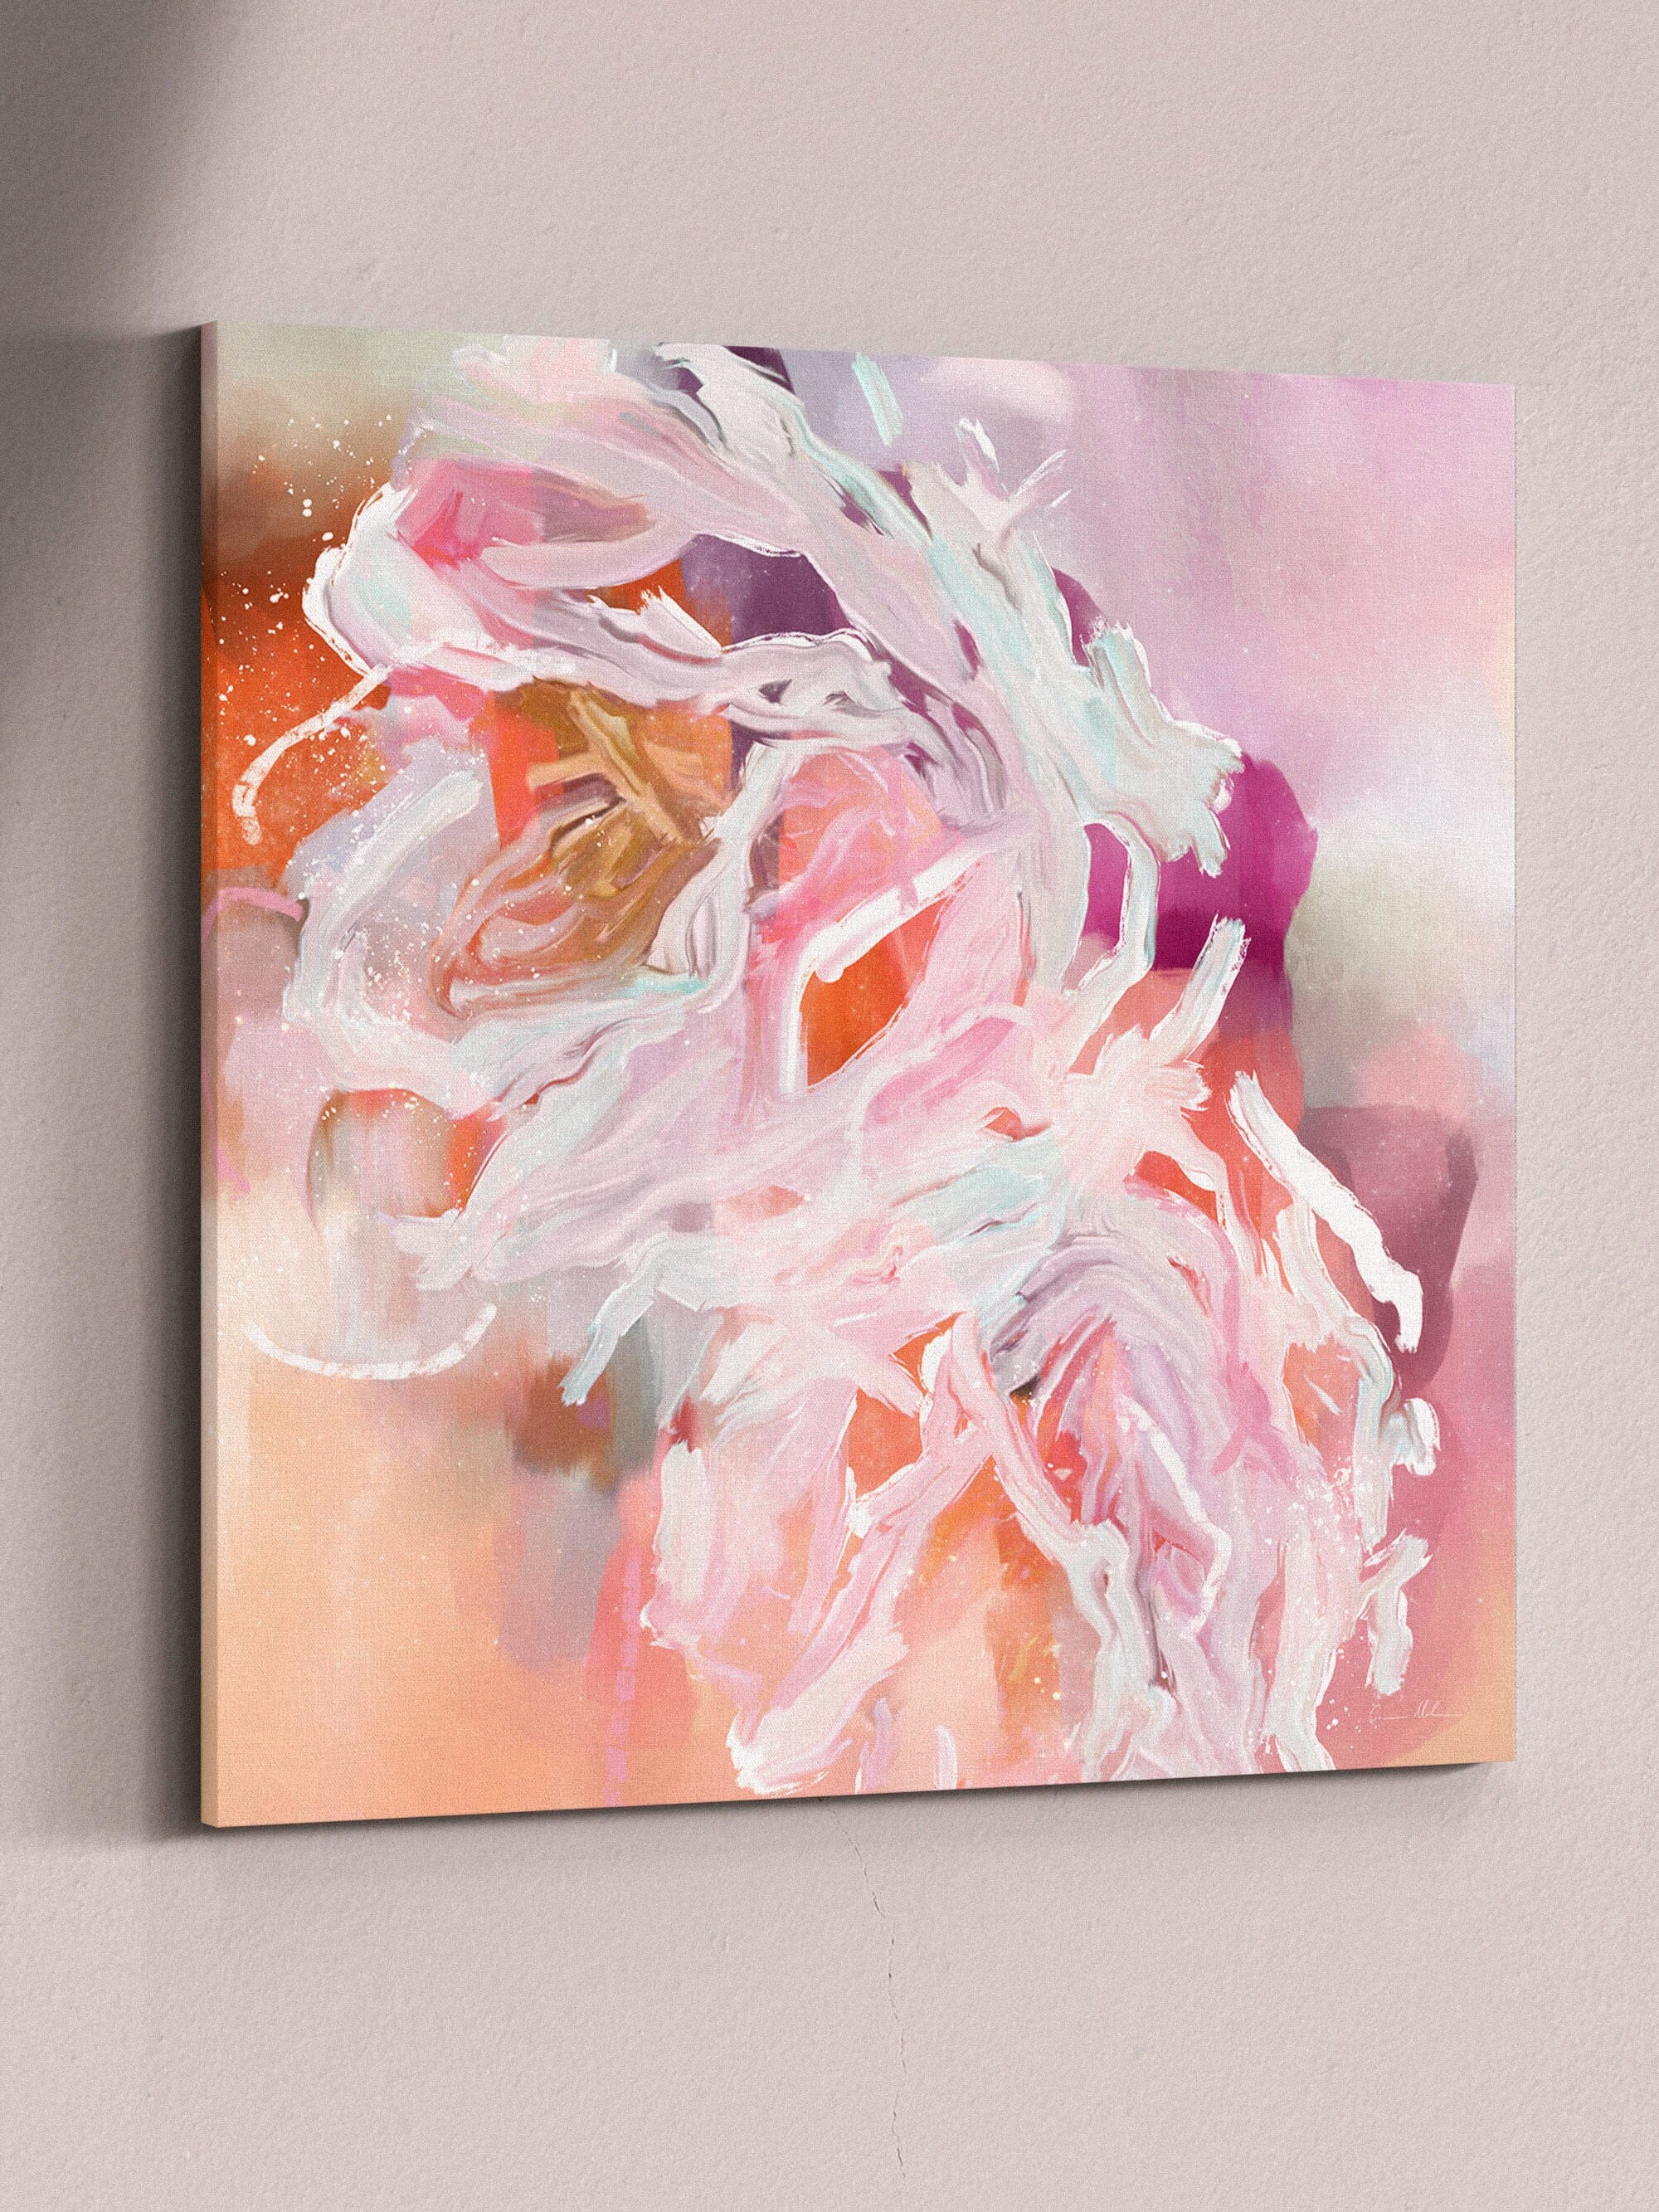 "Calypso No. 2" on Canvas Canvas Wall Art Corinne Melanie Stretched & Ready to Hang Canvas Square XS: 20x20in / 50x50cm 